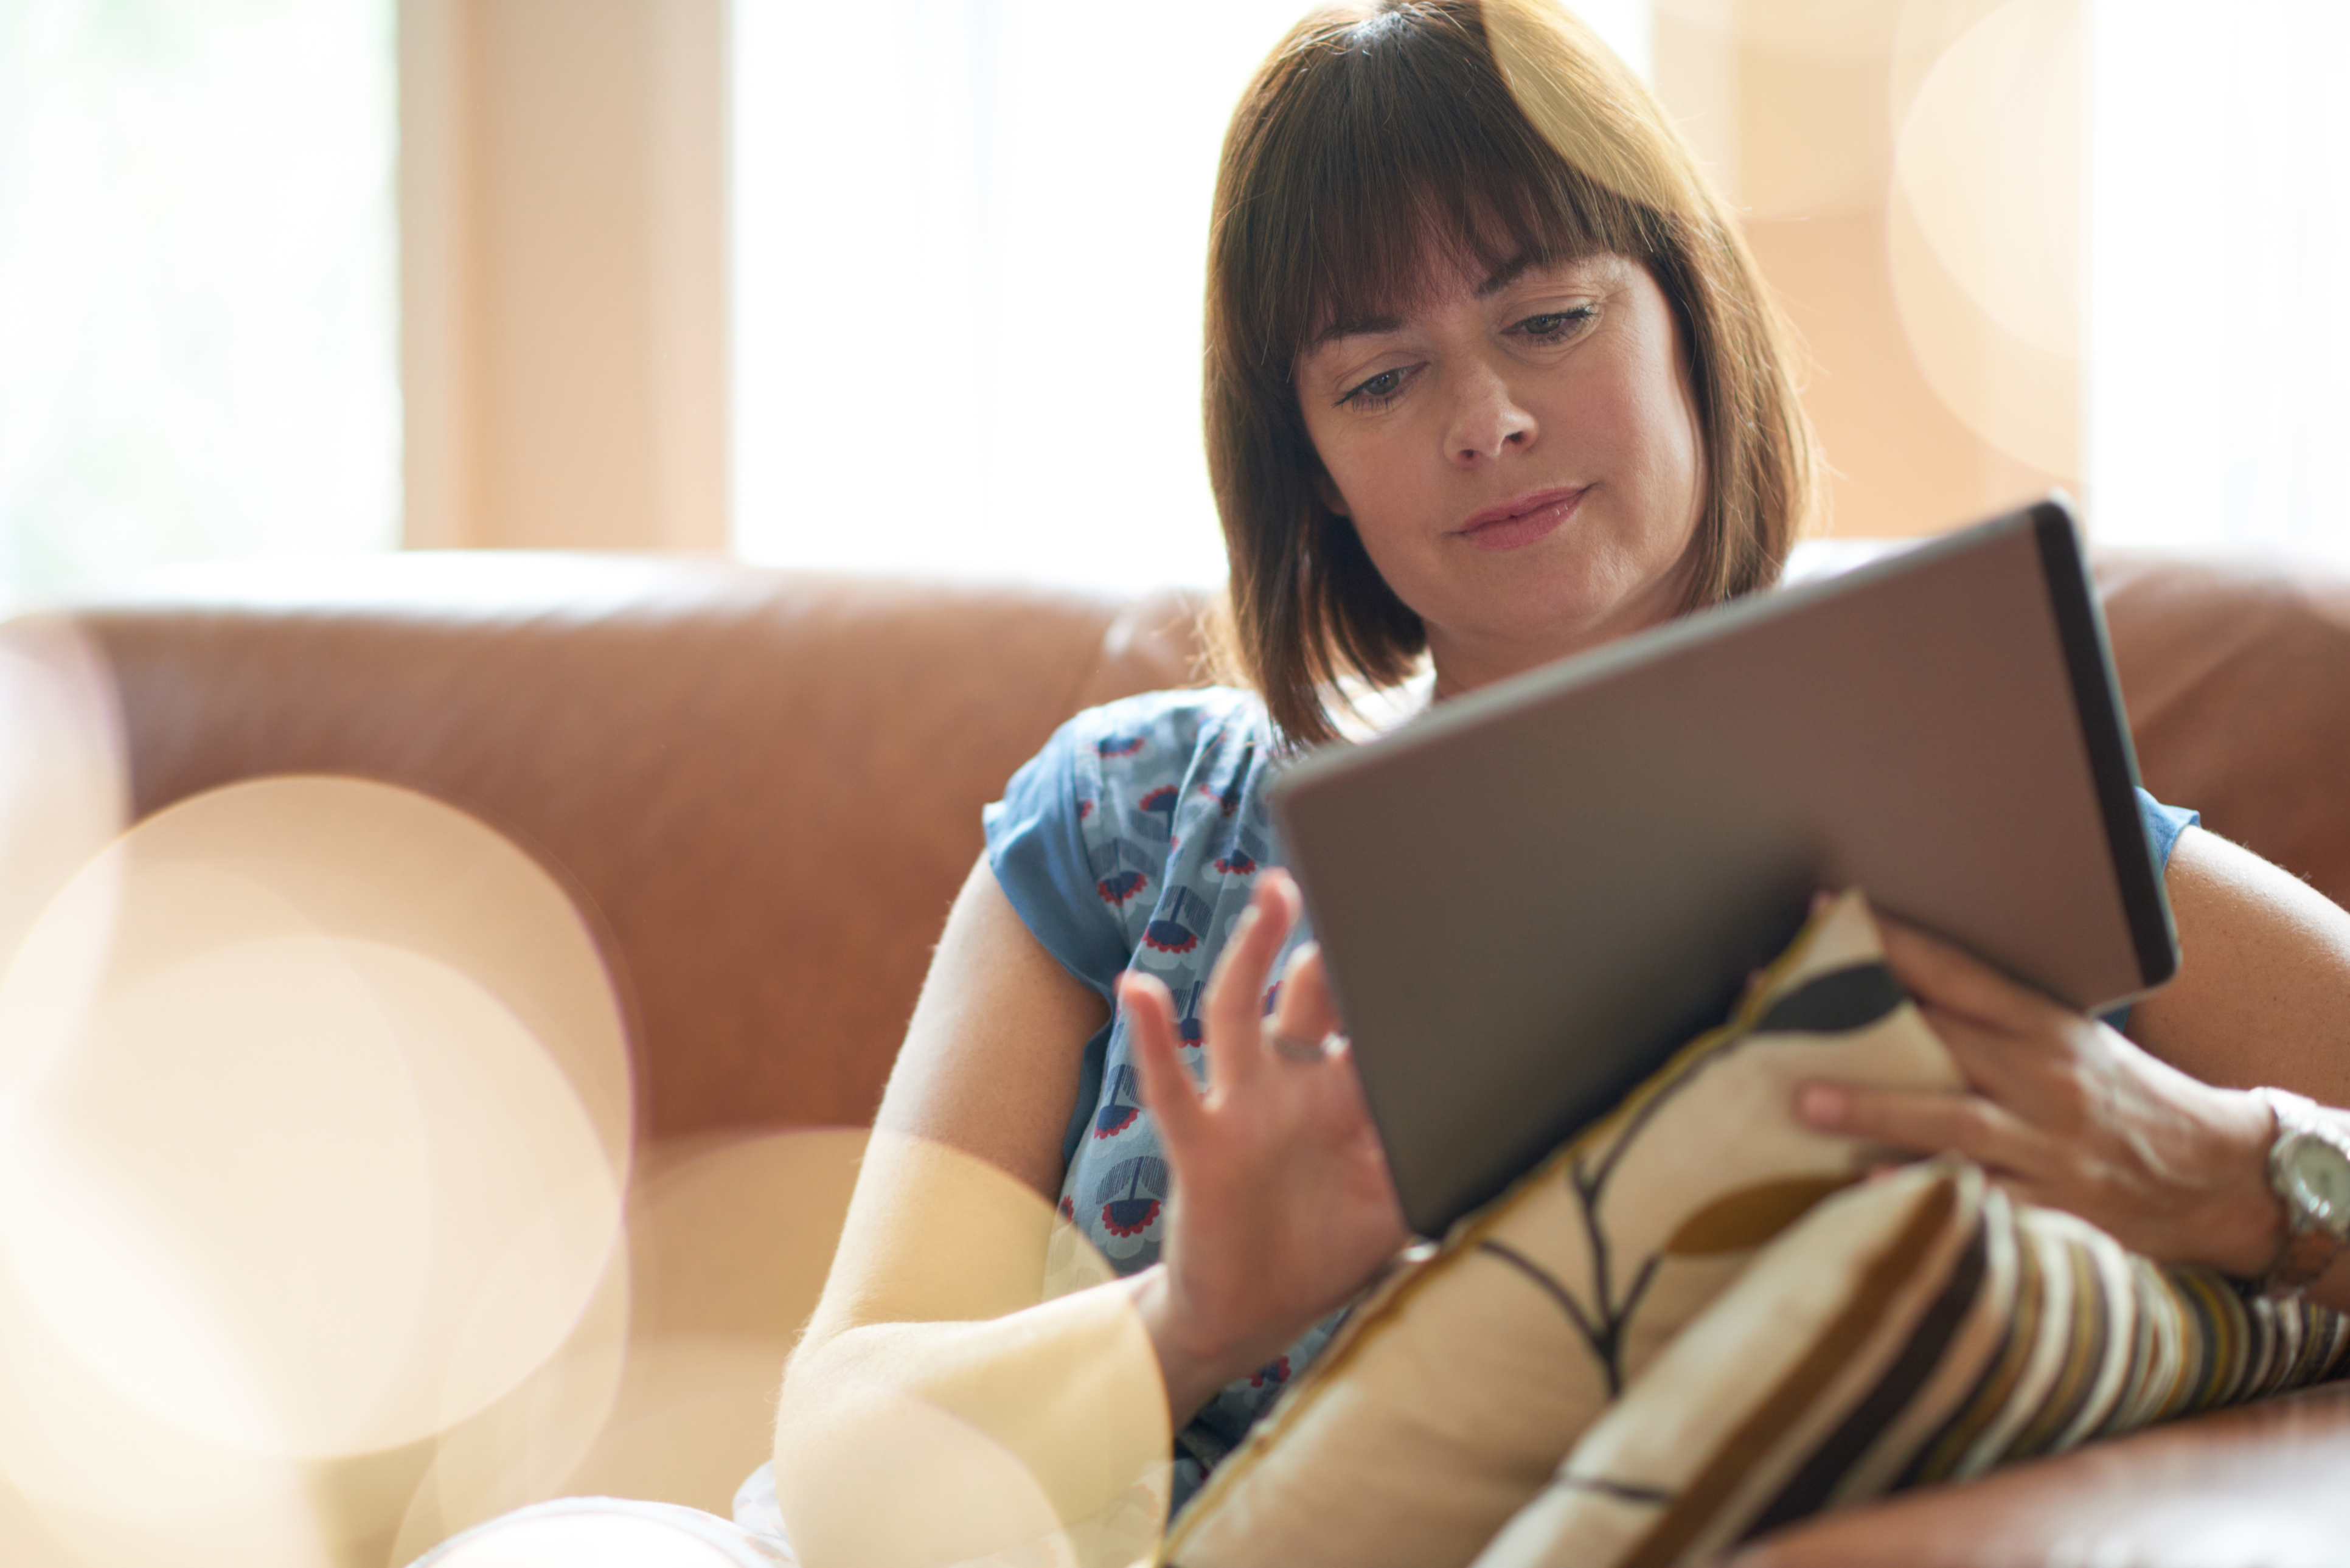 Woman looking relaxed, sat on sofa browsing on tablet device. Bokeh effect in foreground